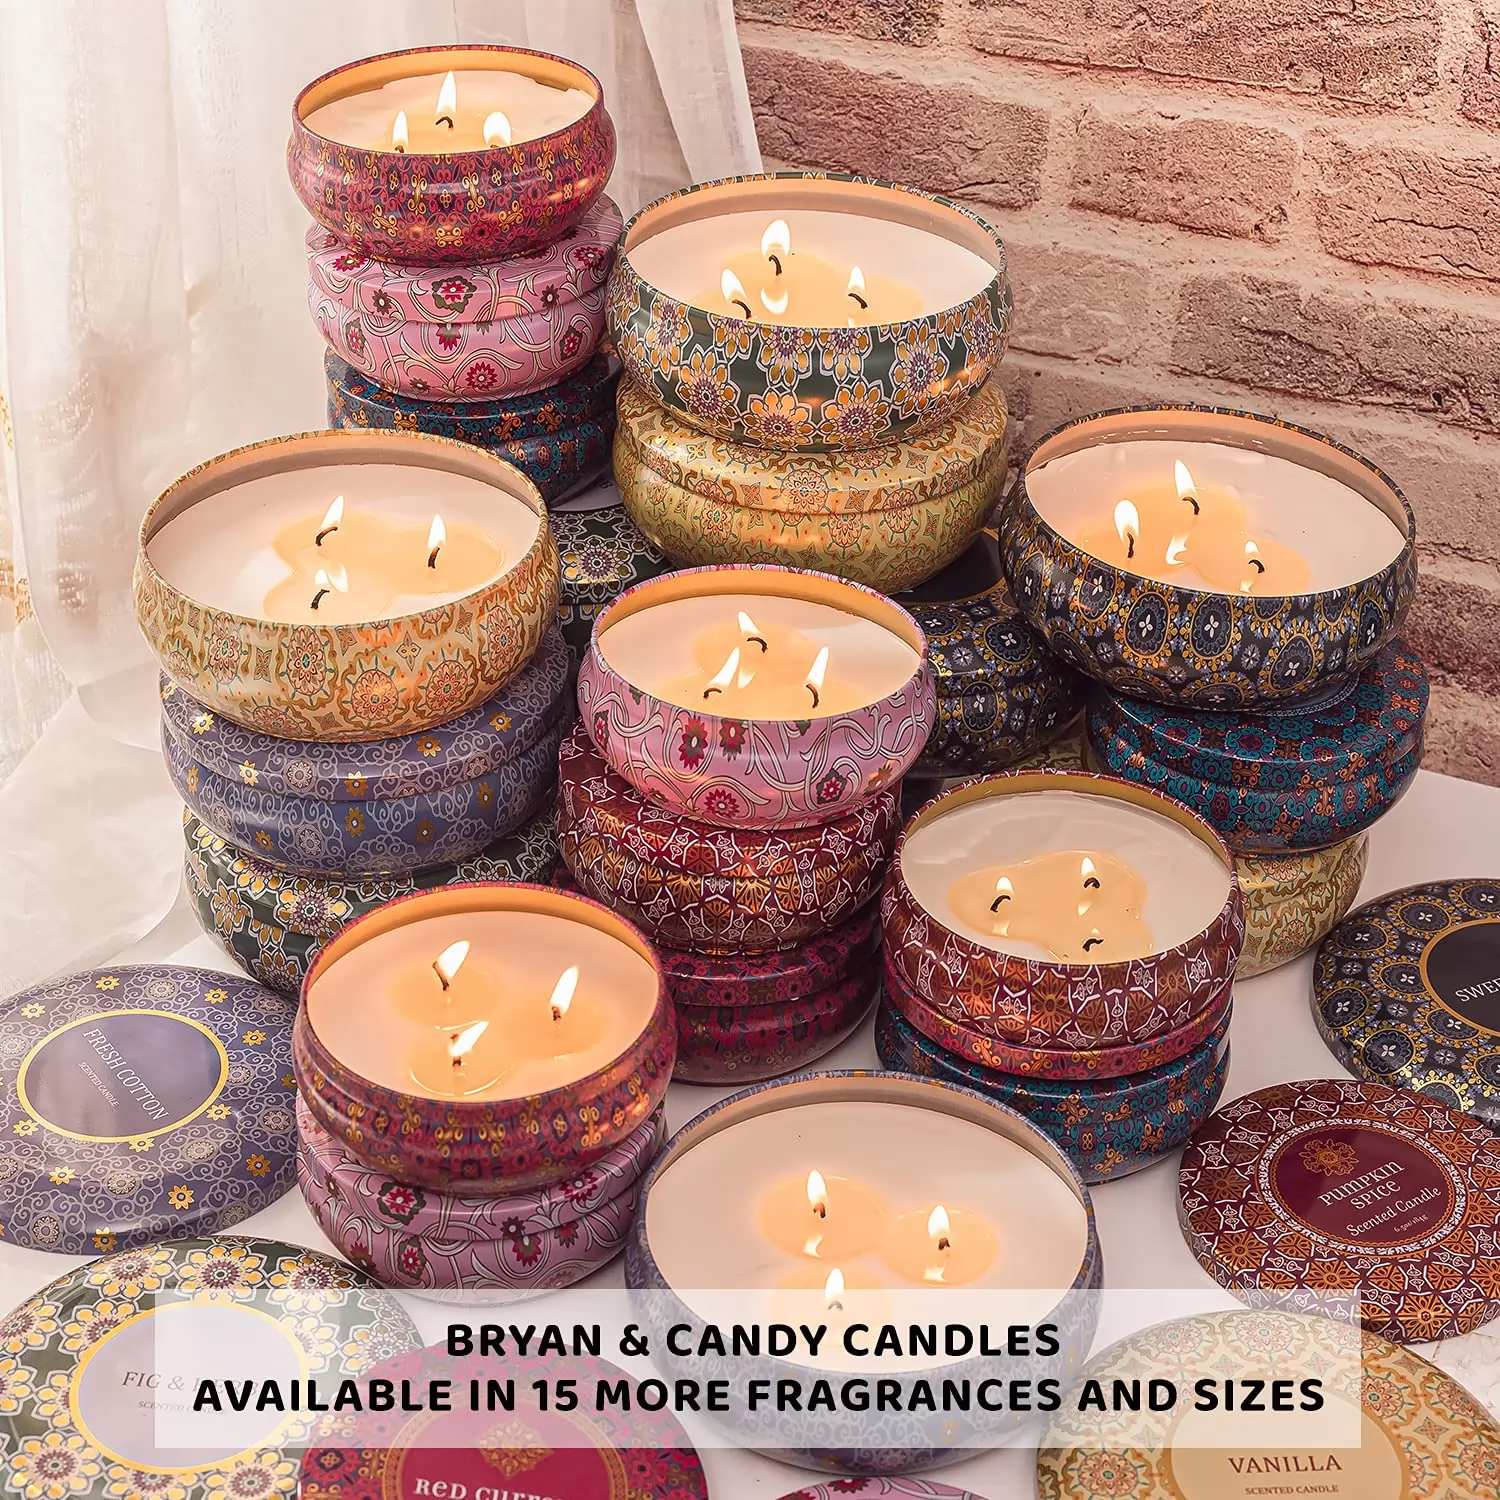 Bryan & Candy Scented Candles